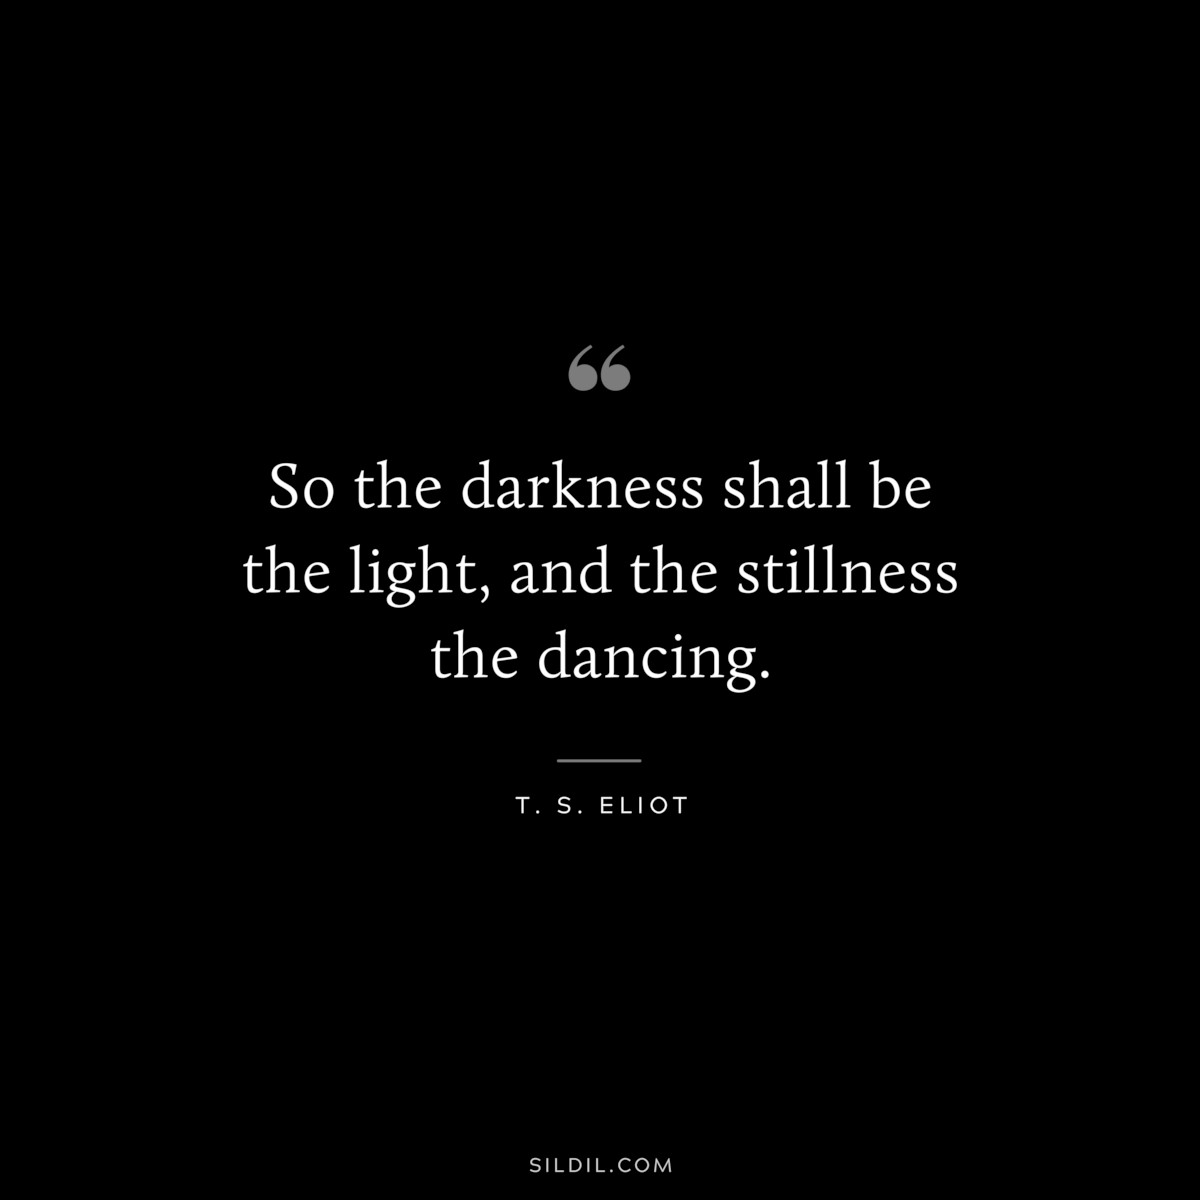 So the darkness shall be the light, and the stillness the dancing. ― T. S. Eliot